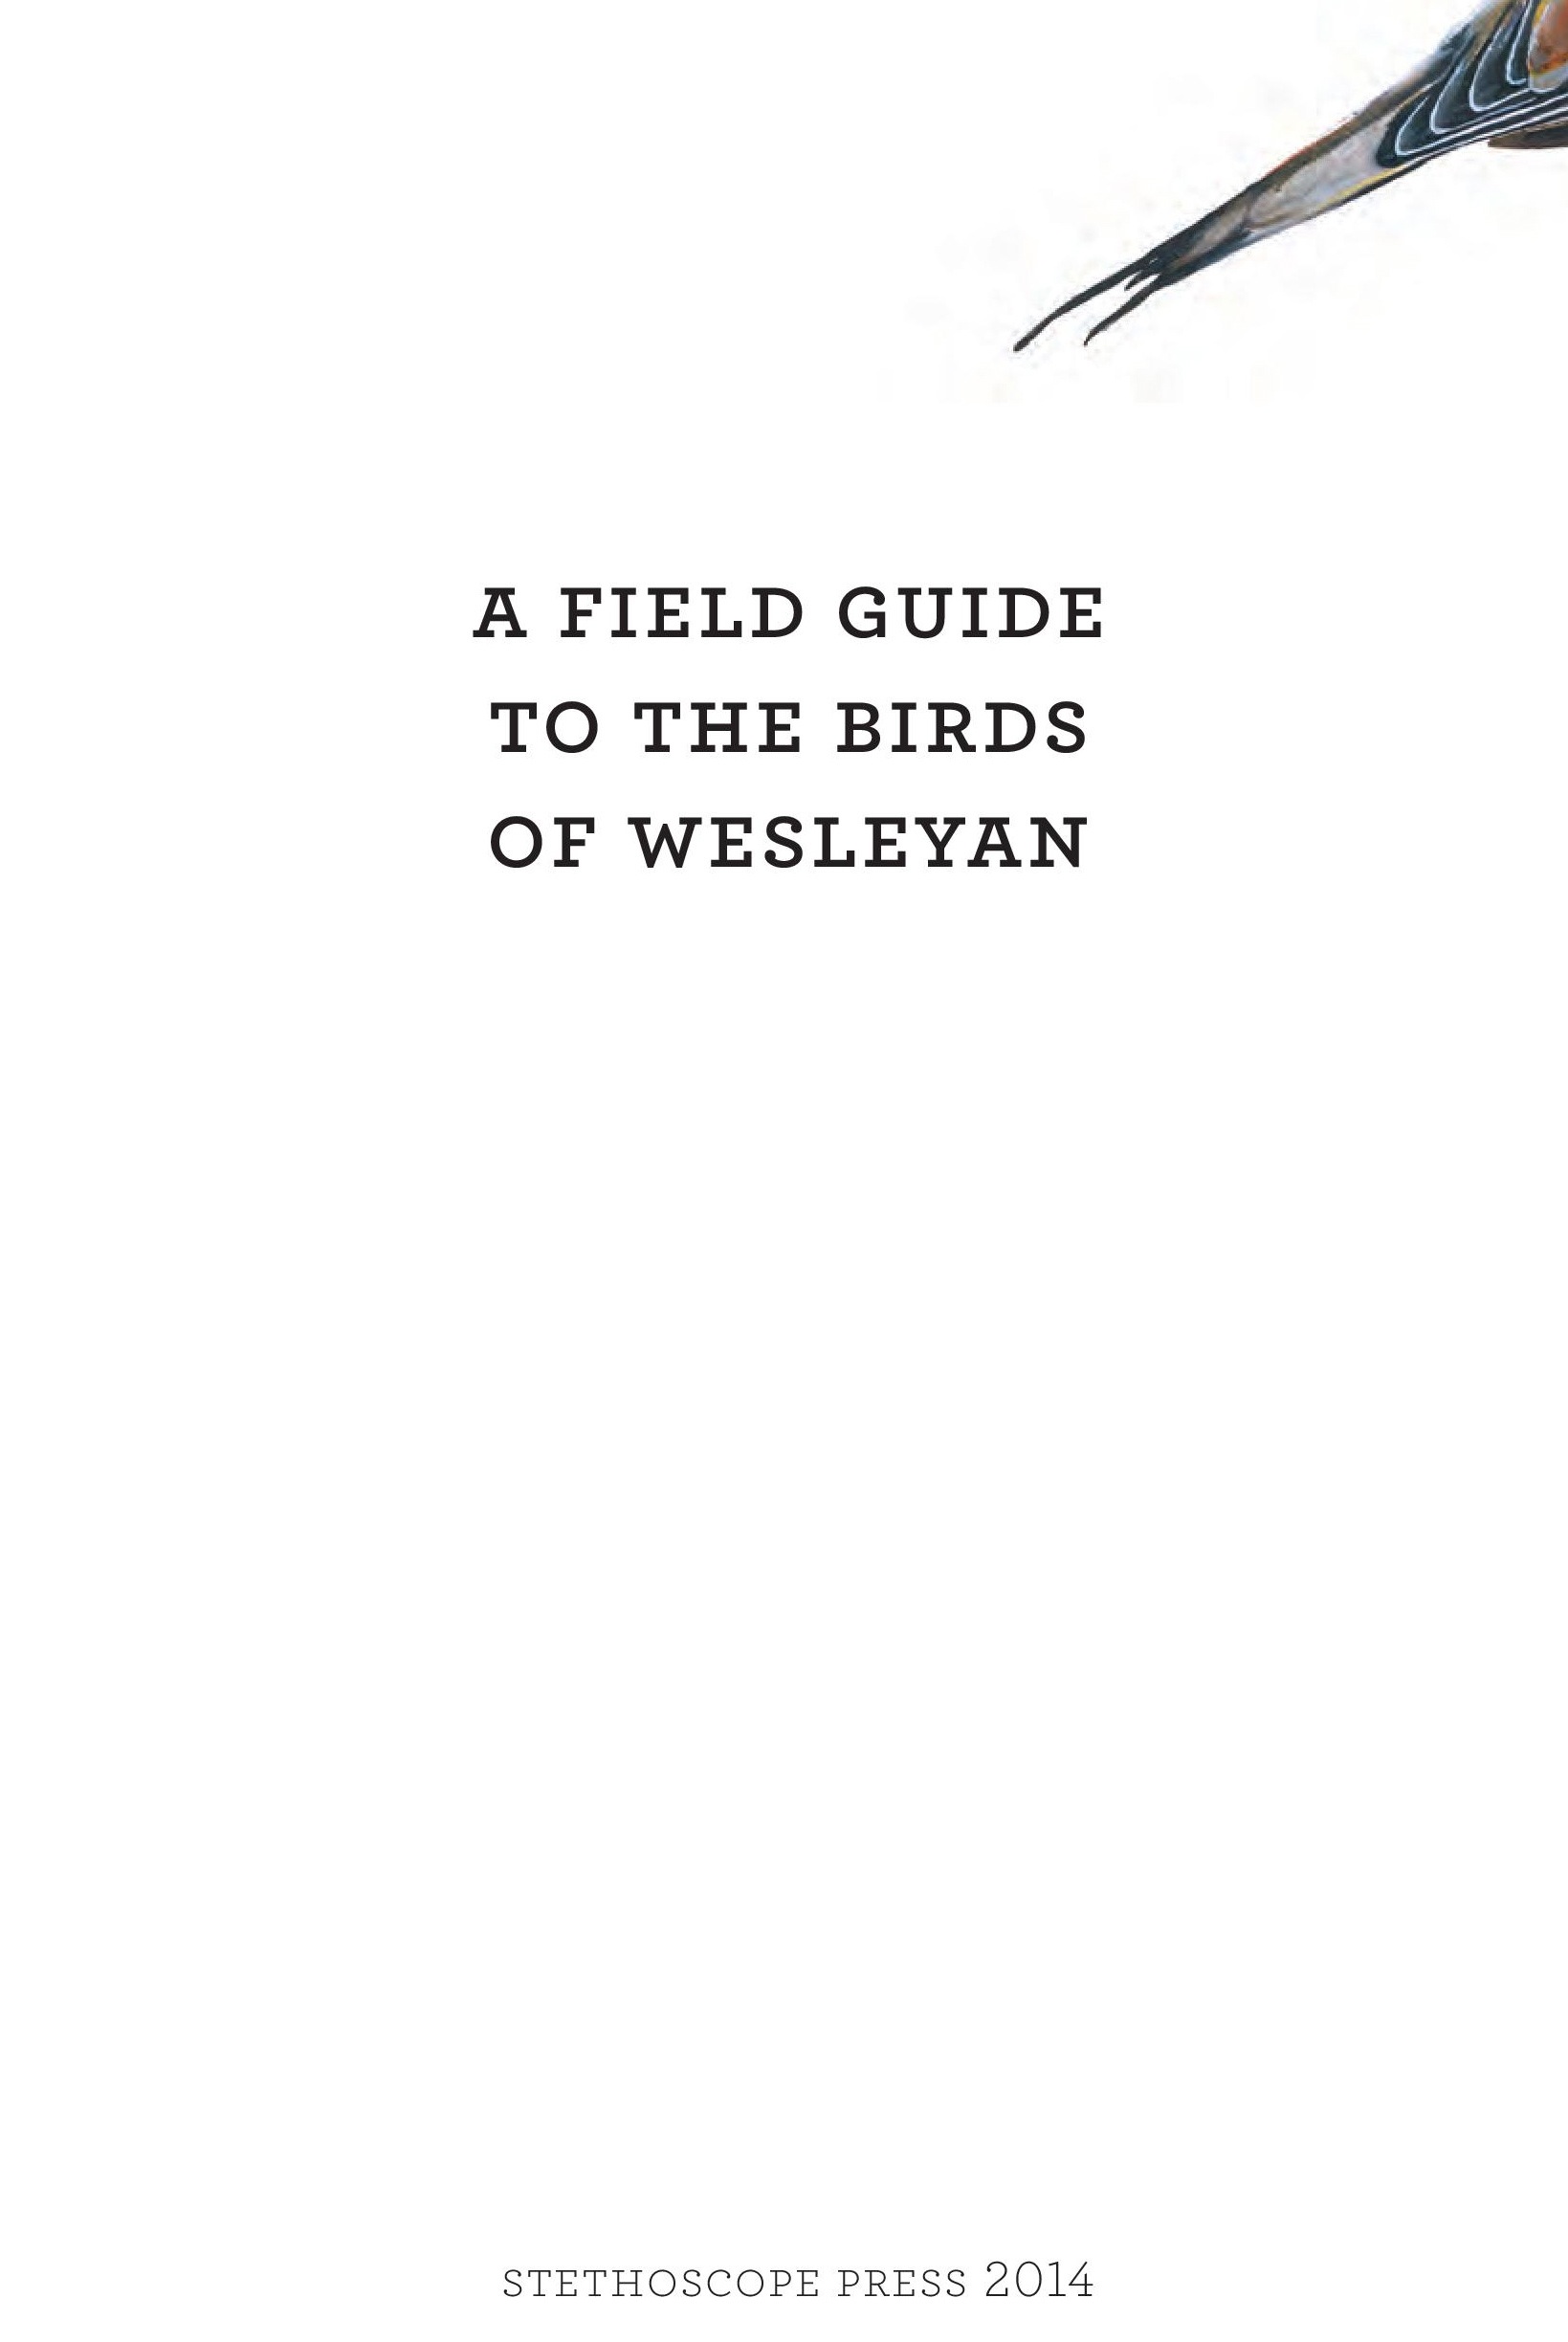 James_FieldGuide_Text screen lores (3)-page-001.jpg